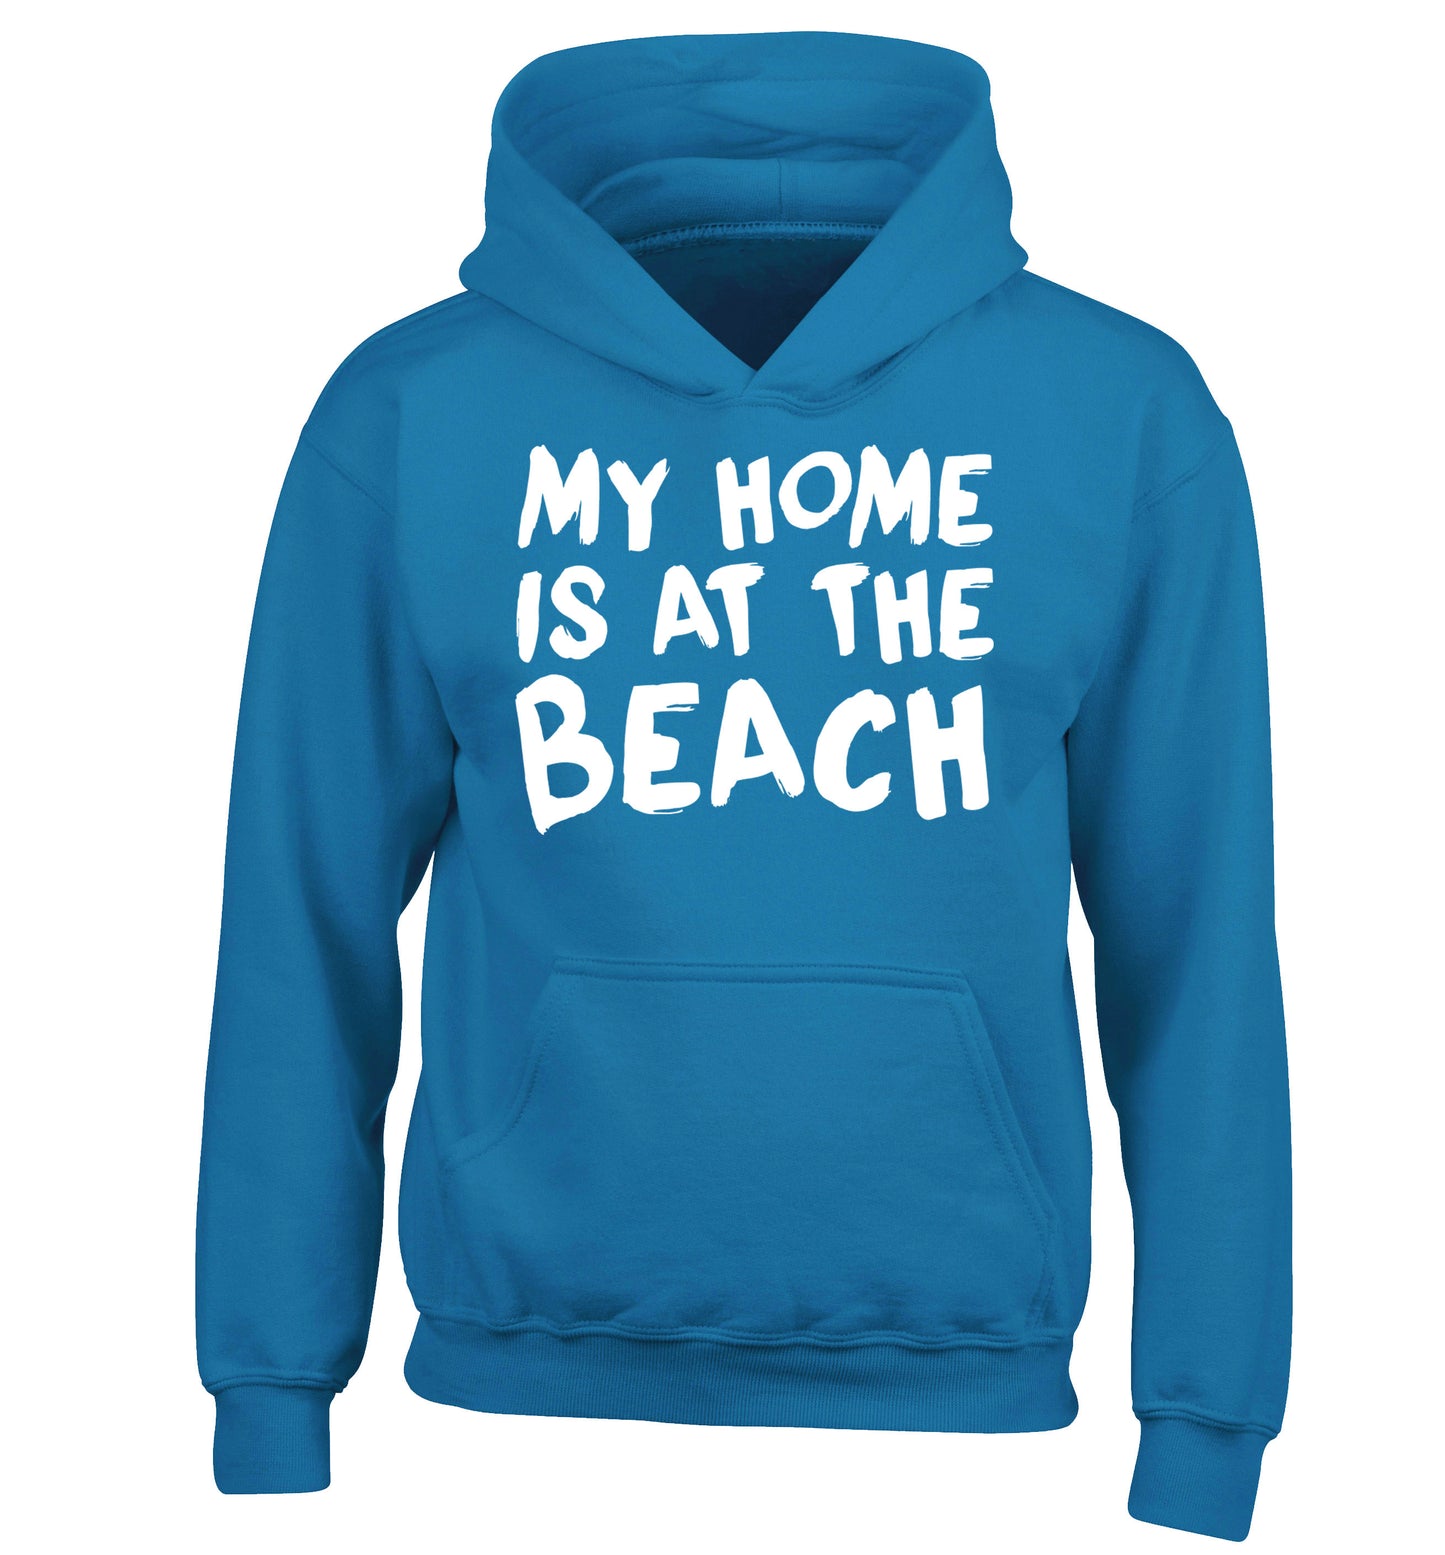 My home is at the beach children's blue hoodie 12-14 Years